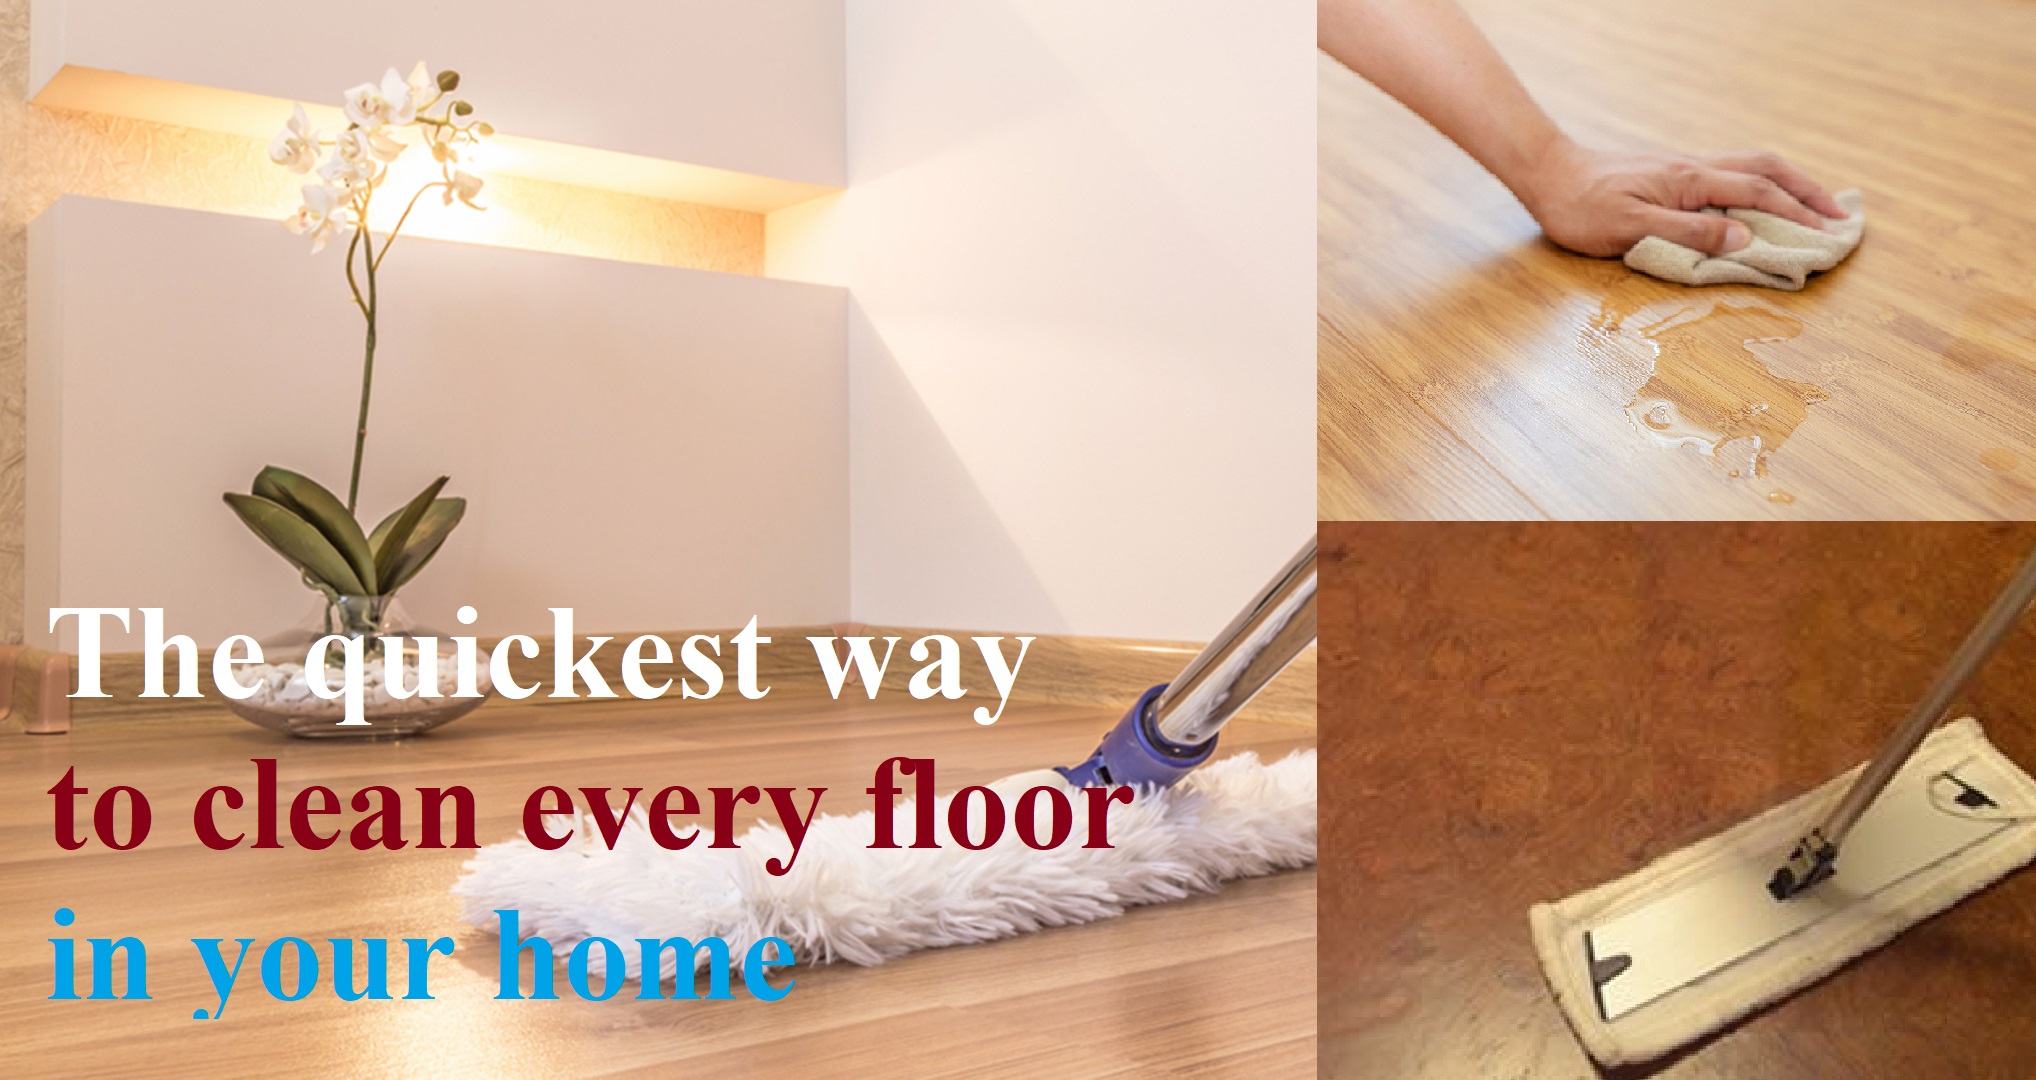 The quickest way to clean every floor in your home